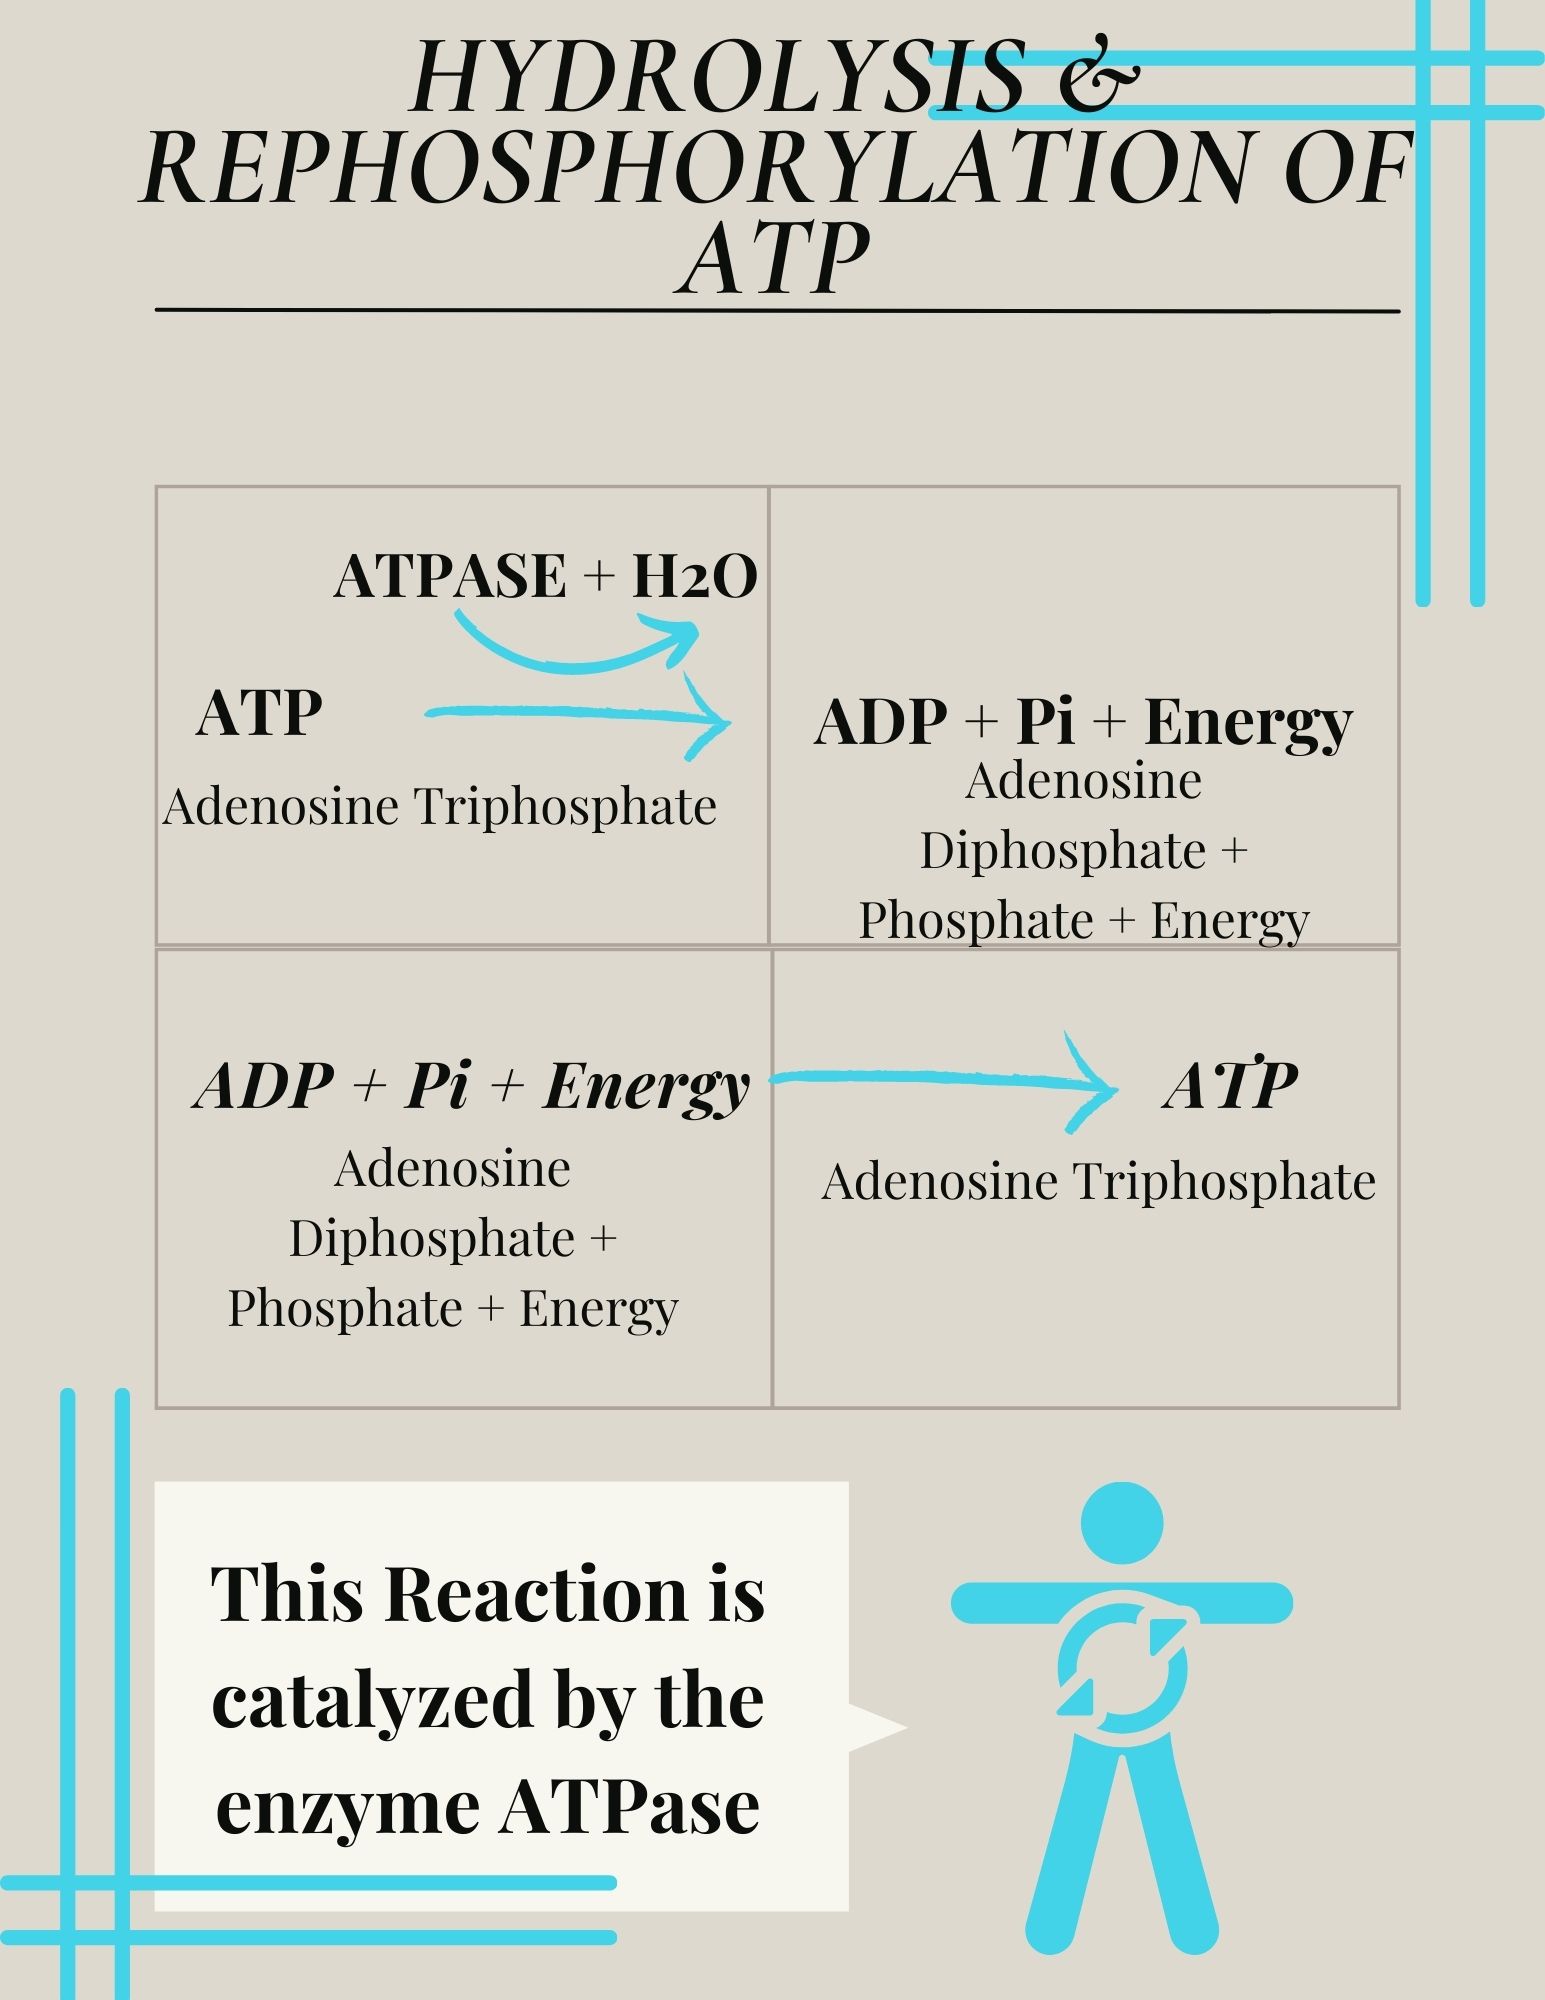 Infographic summarizing reactions of ATP. The hydrolysis of ATP is when ATP is broken down to ADP, inorganic phosphate, and energy. This reaction requires water and is catalyzed by the enzyme ATPase. Rephosphorylation of ATP occurs when ADP and inorganic phosphate combine to form ATP. This reaction requires energy.